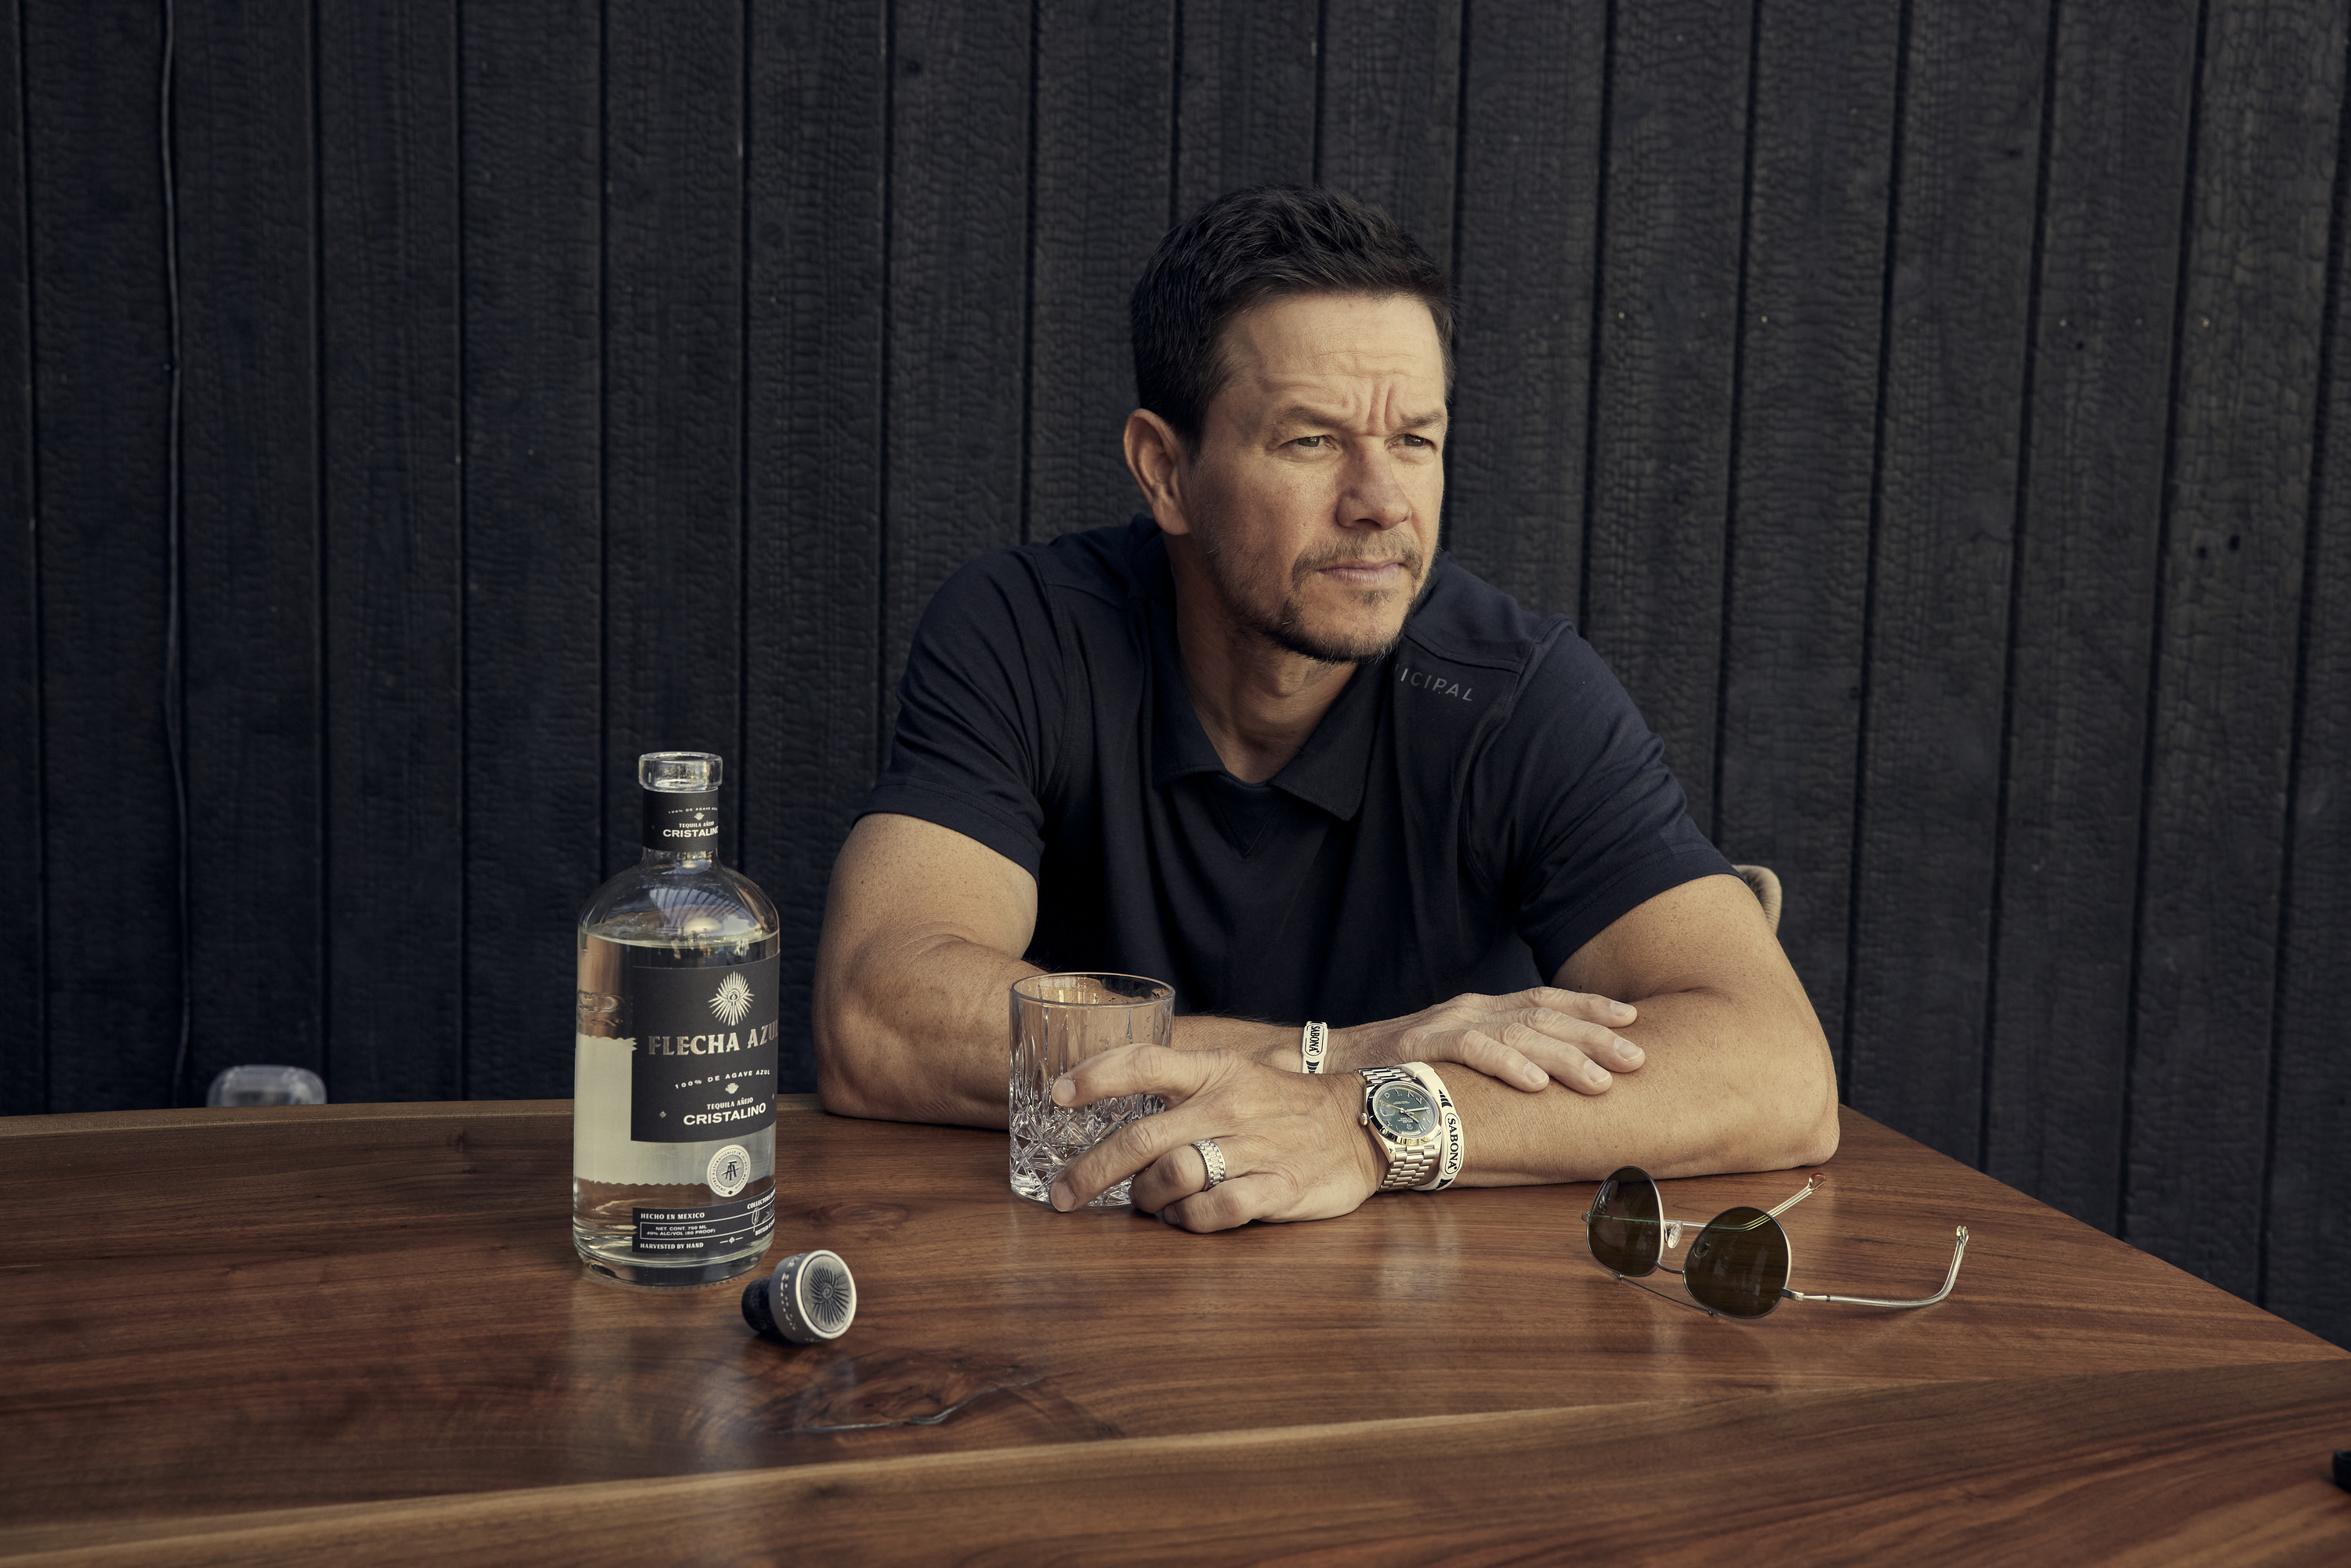 Flecha Azul tequila is a stand out liquor thanks to Mark Wahlberg